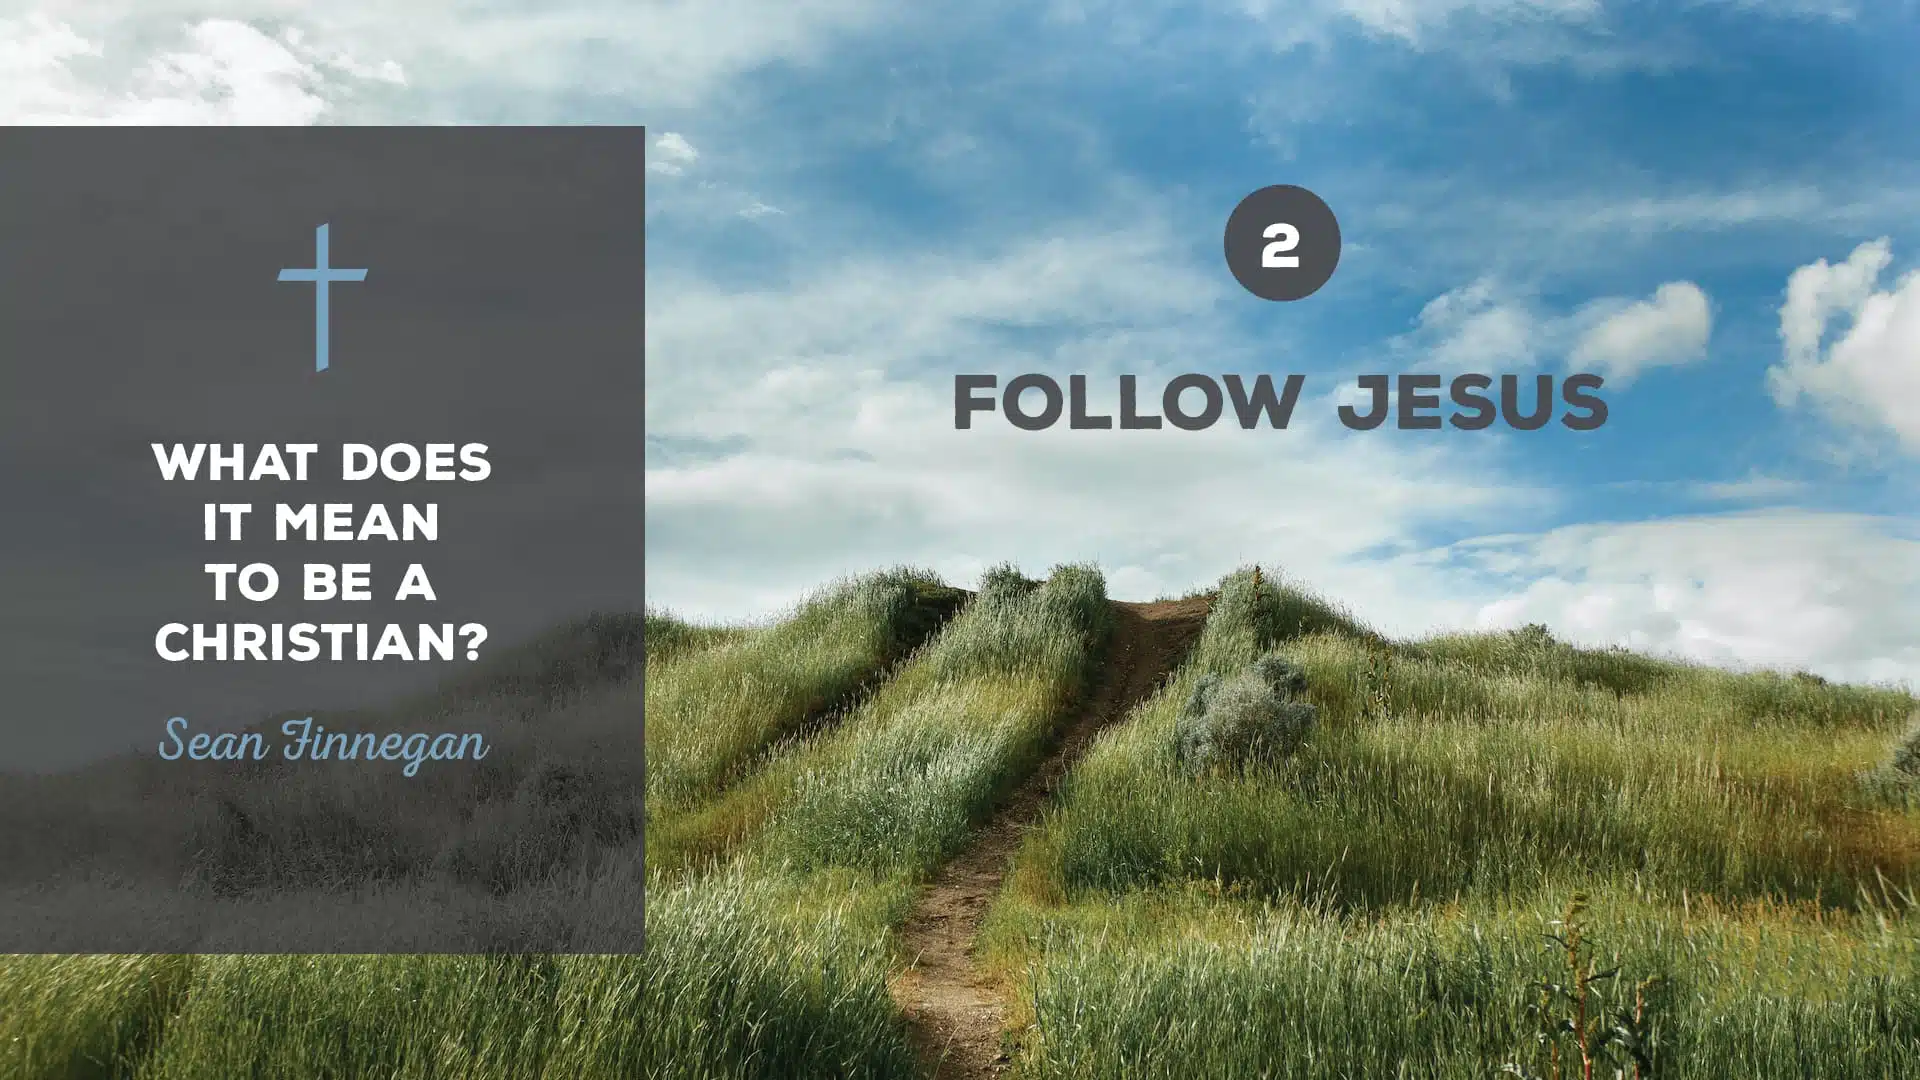 What Does It Mean to Be a Christian? 2: Follow Jesus